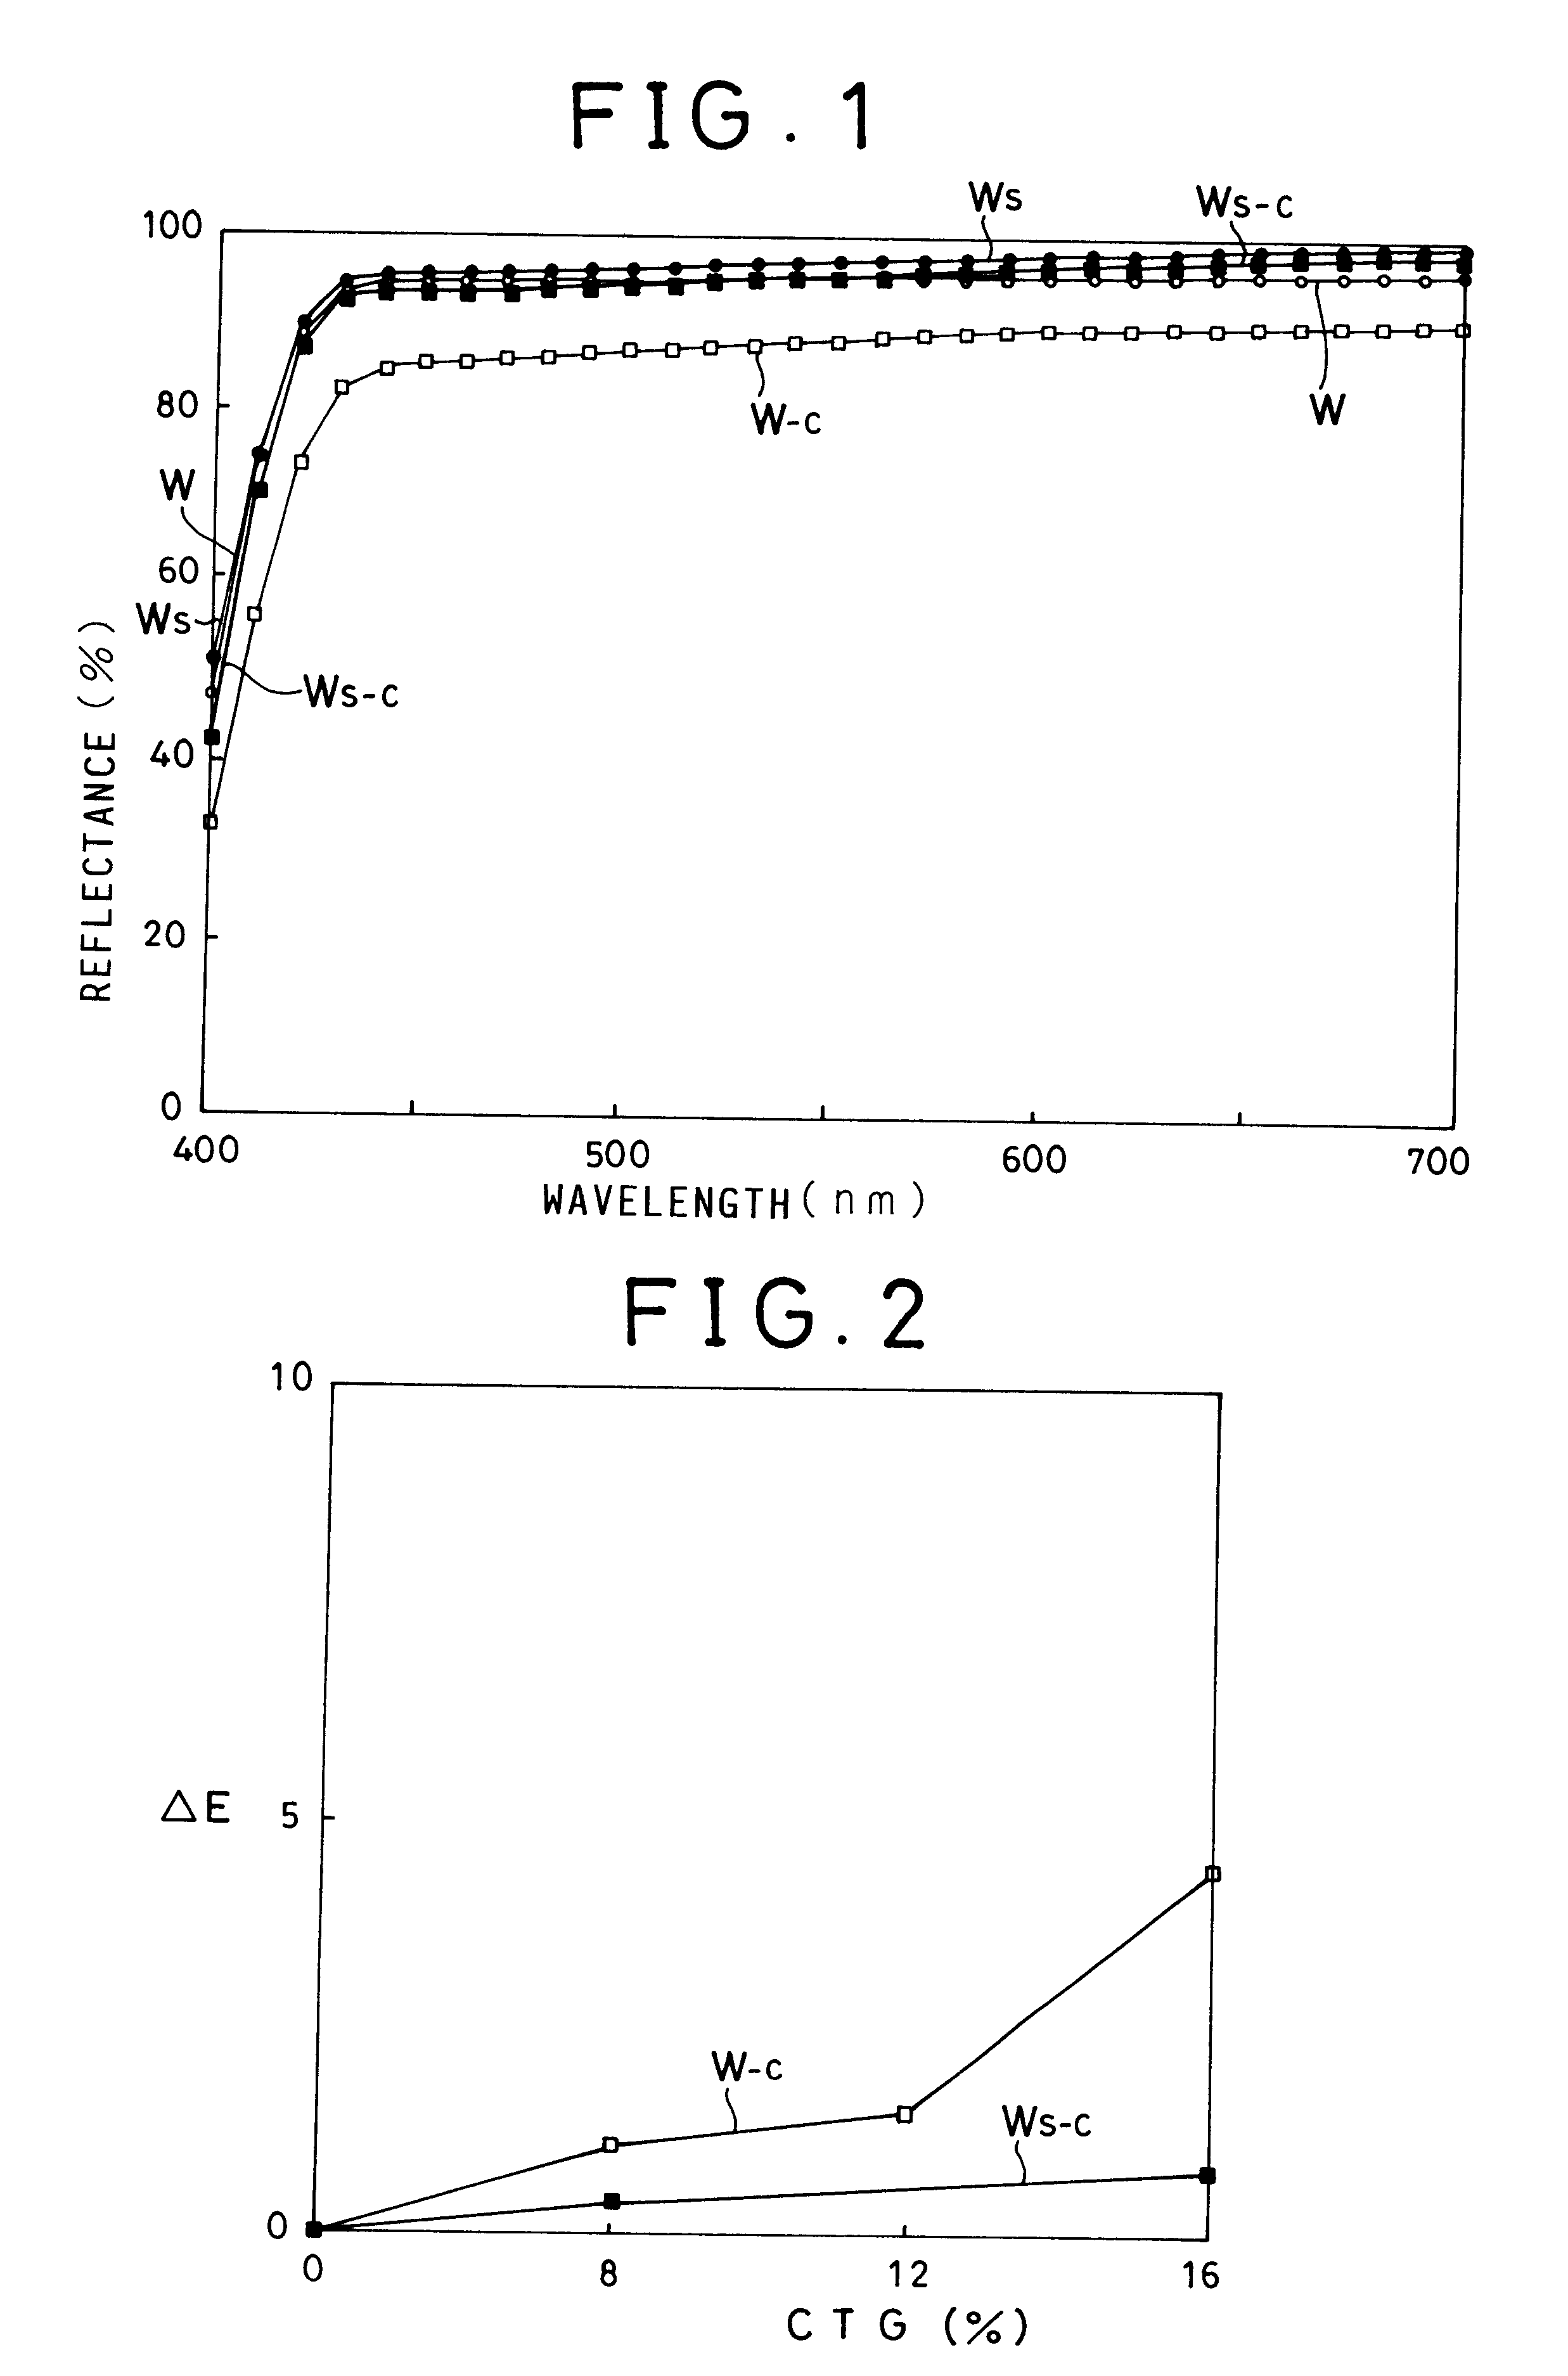 Inorganic compound-coated pigments and cosmetics using the same